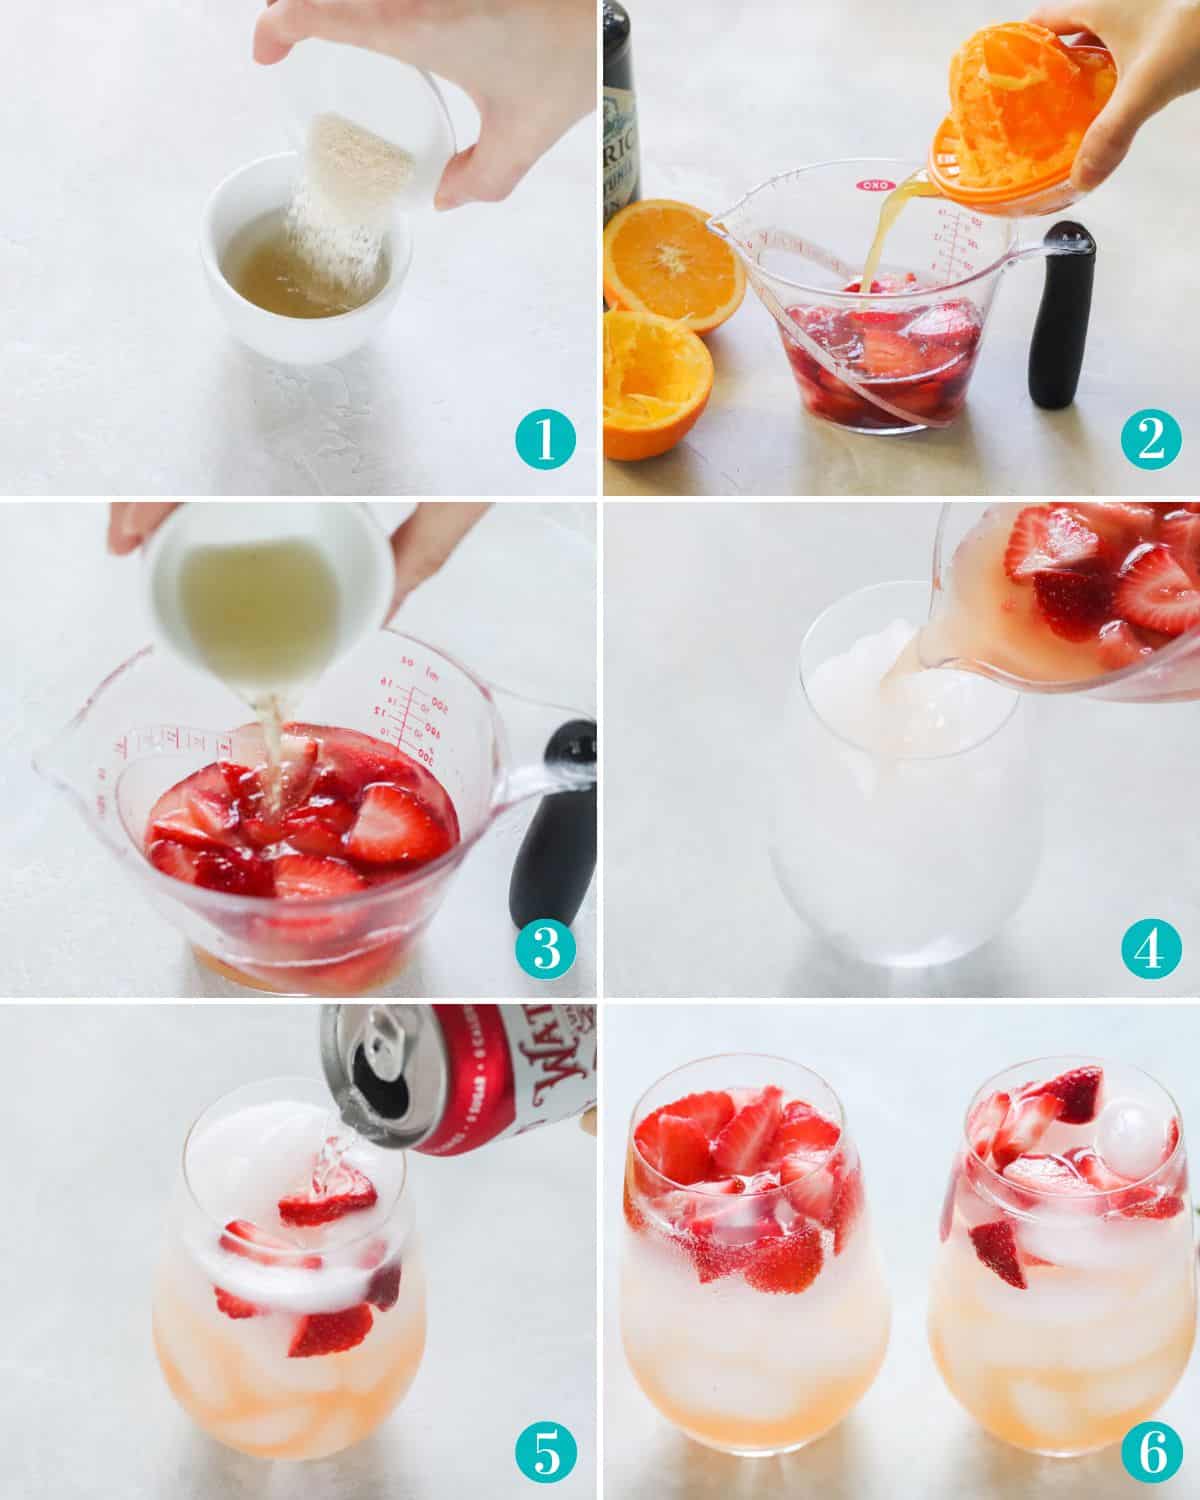 six photo collage of sugar being poured into a small bowl of water, then a measuring cup full of strawberries, gin and oranges with orange juice being poured in, then the sugar water being poured into the strawberries, then the mixture being poured into a glass with ice, then topping it off with strawberry sparkling water, then two glasses of gin fizz ready to enjoy